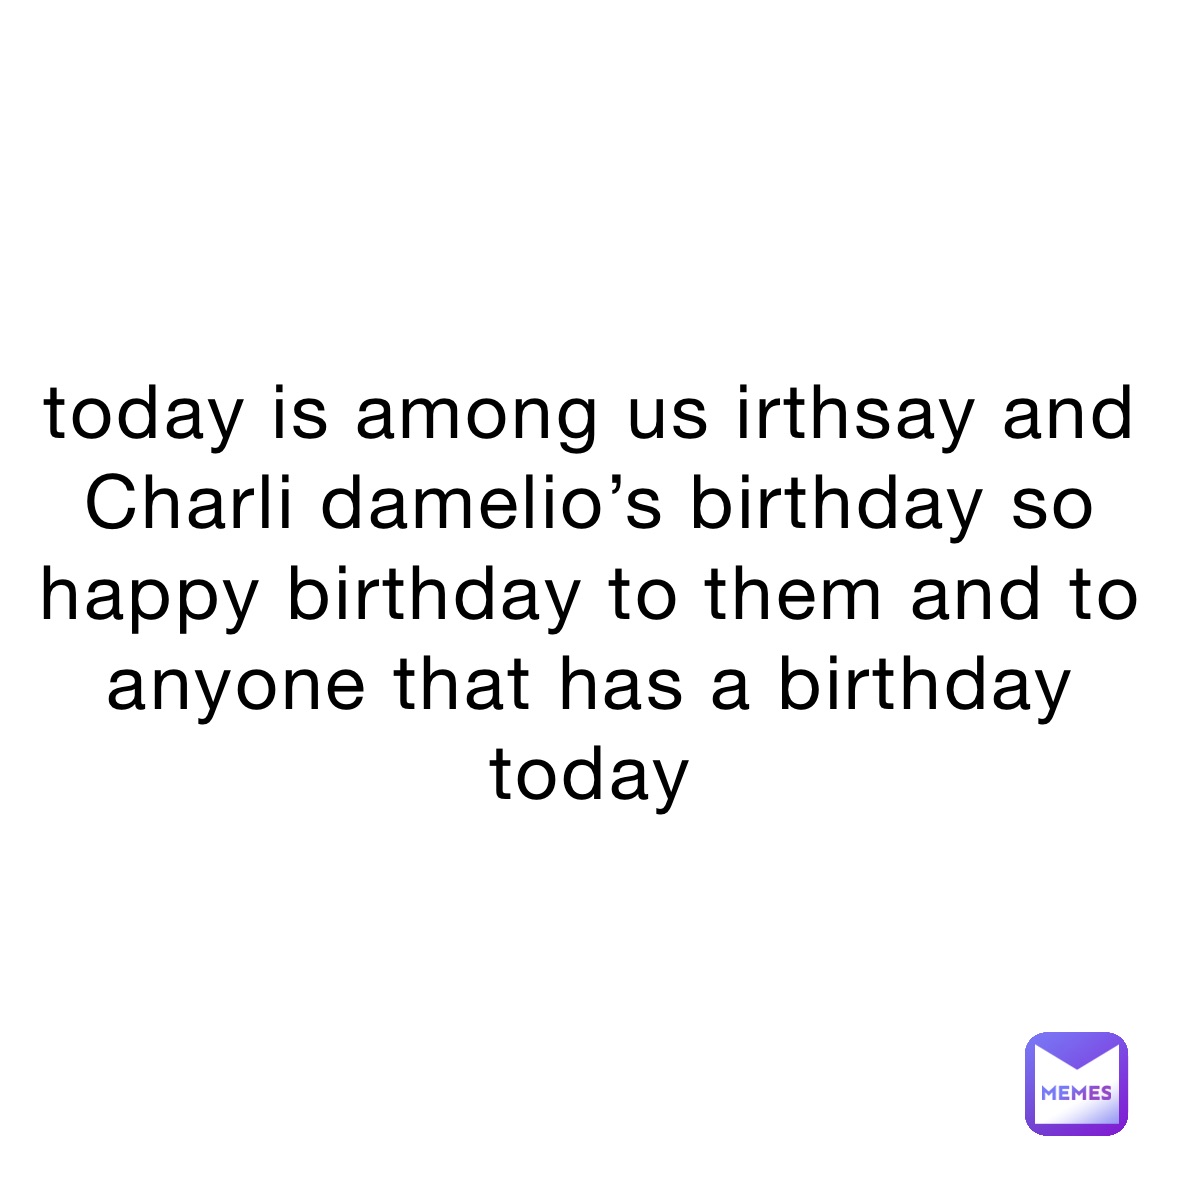 today is among us irthsay and Charli damelio’s birthday so happy birthday to them and to anyone that has a birthday today